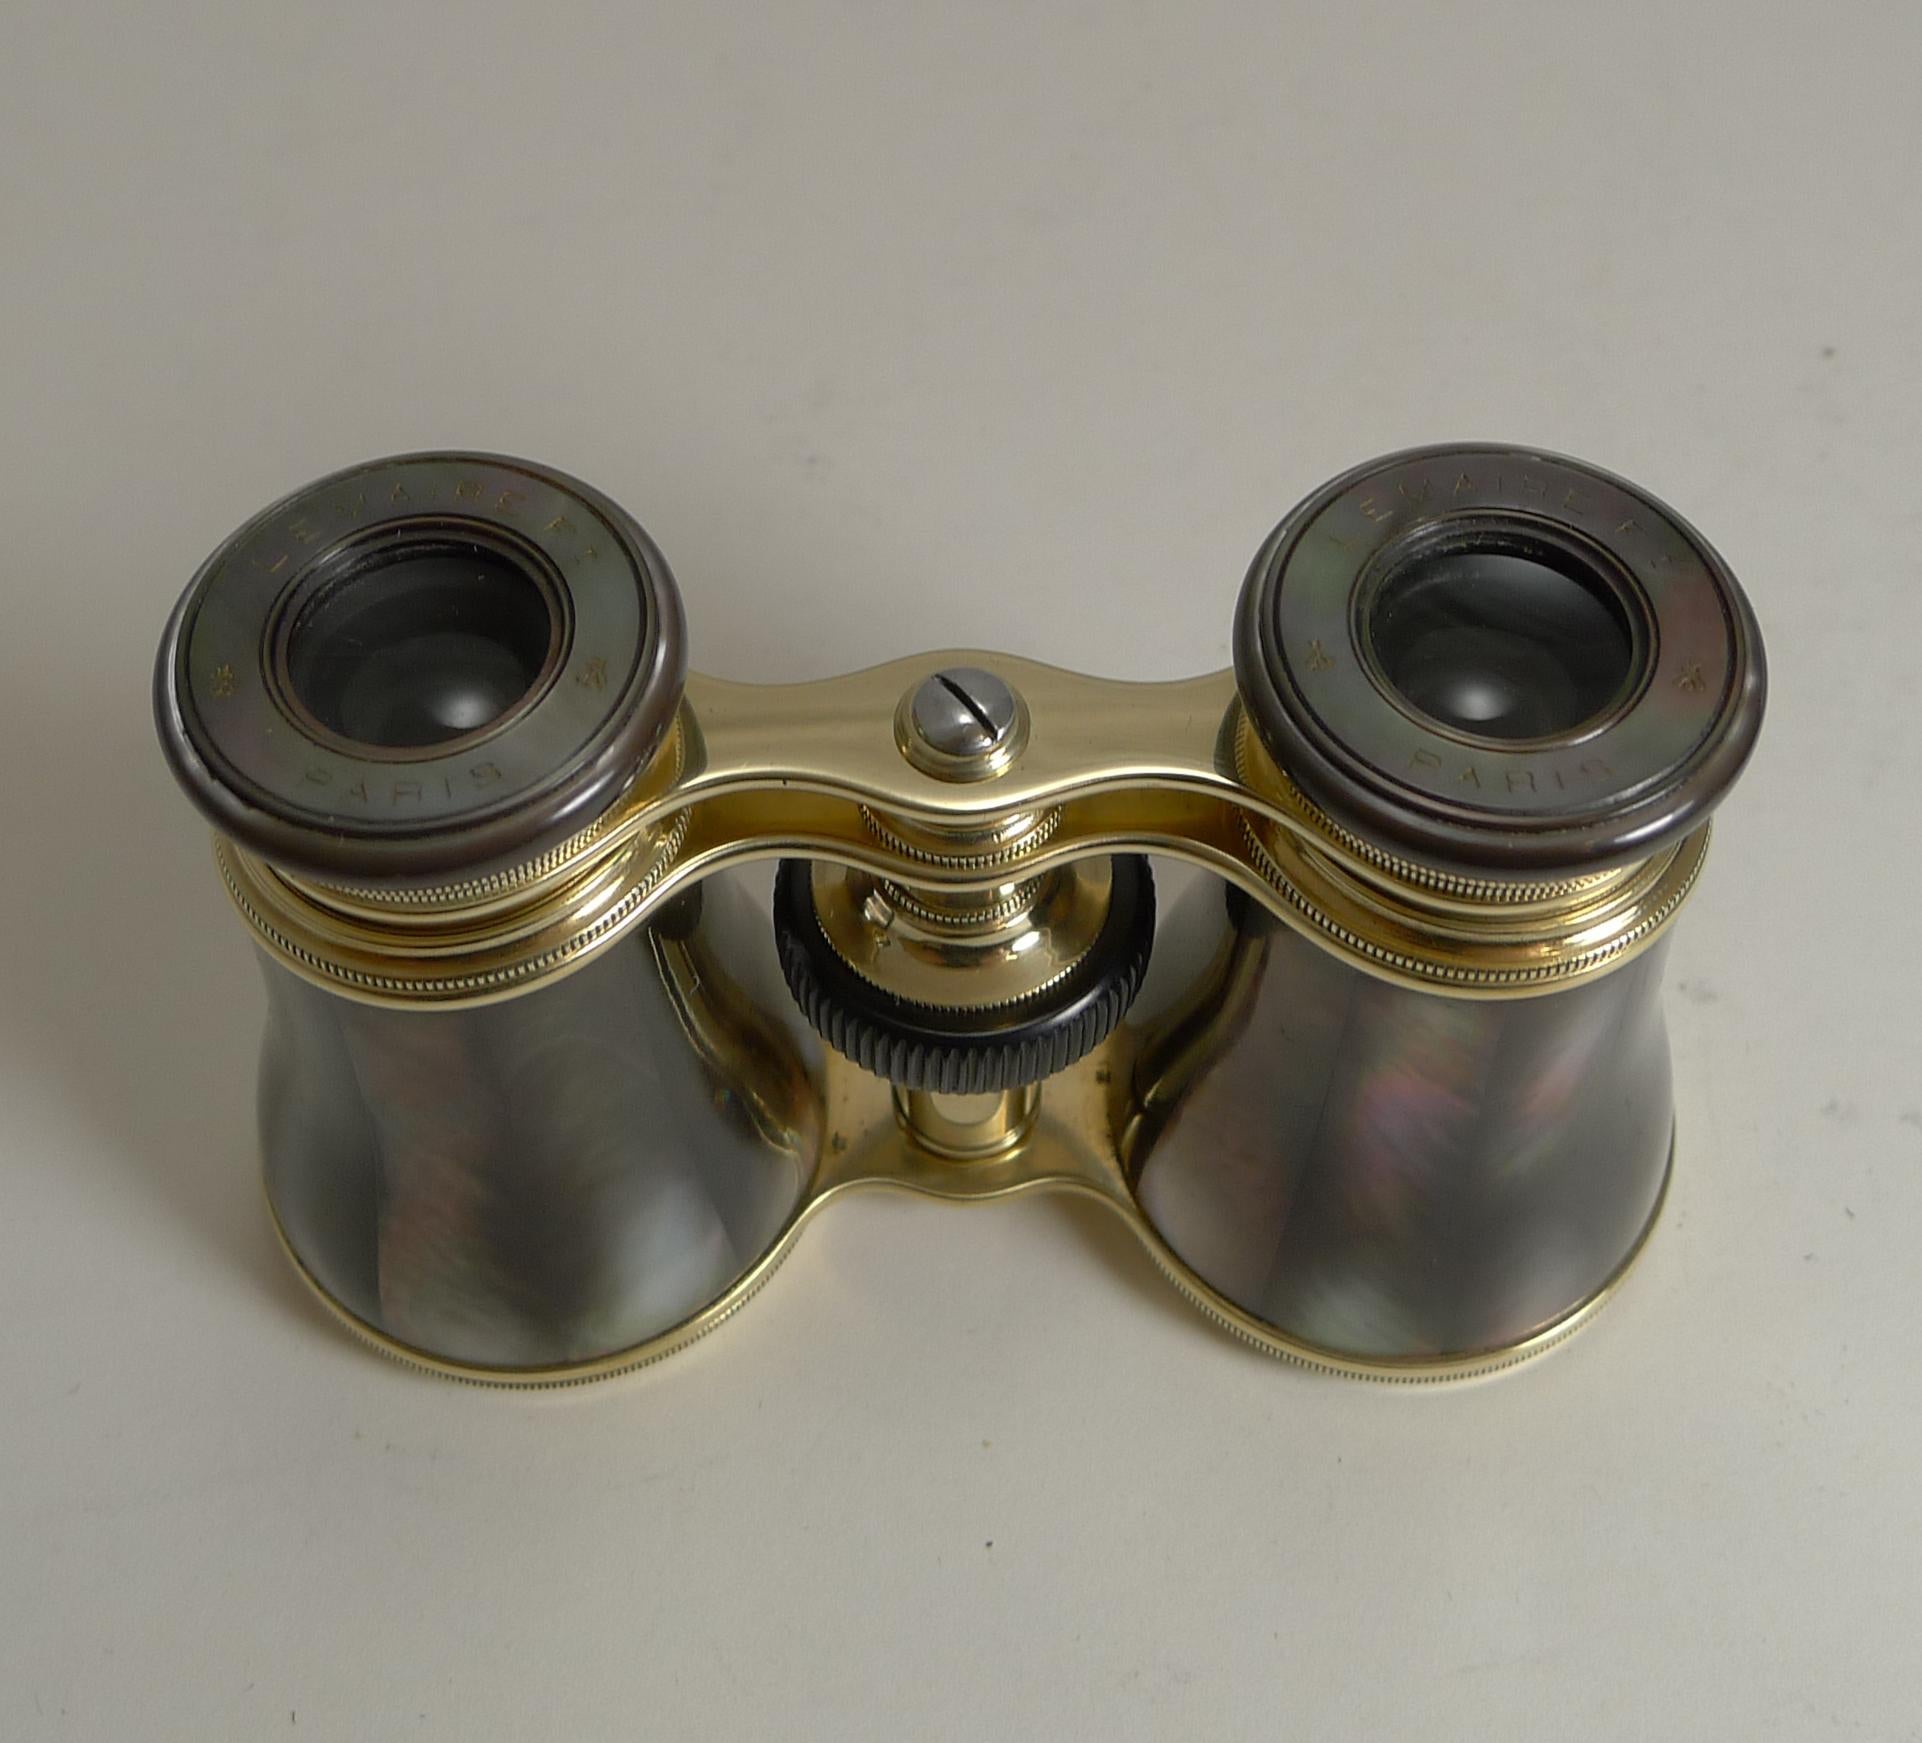 A truly exquisite pair of Opera Glasses by the top-notch maker, LeMaire of Paris 1